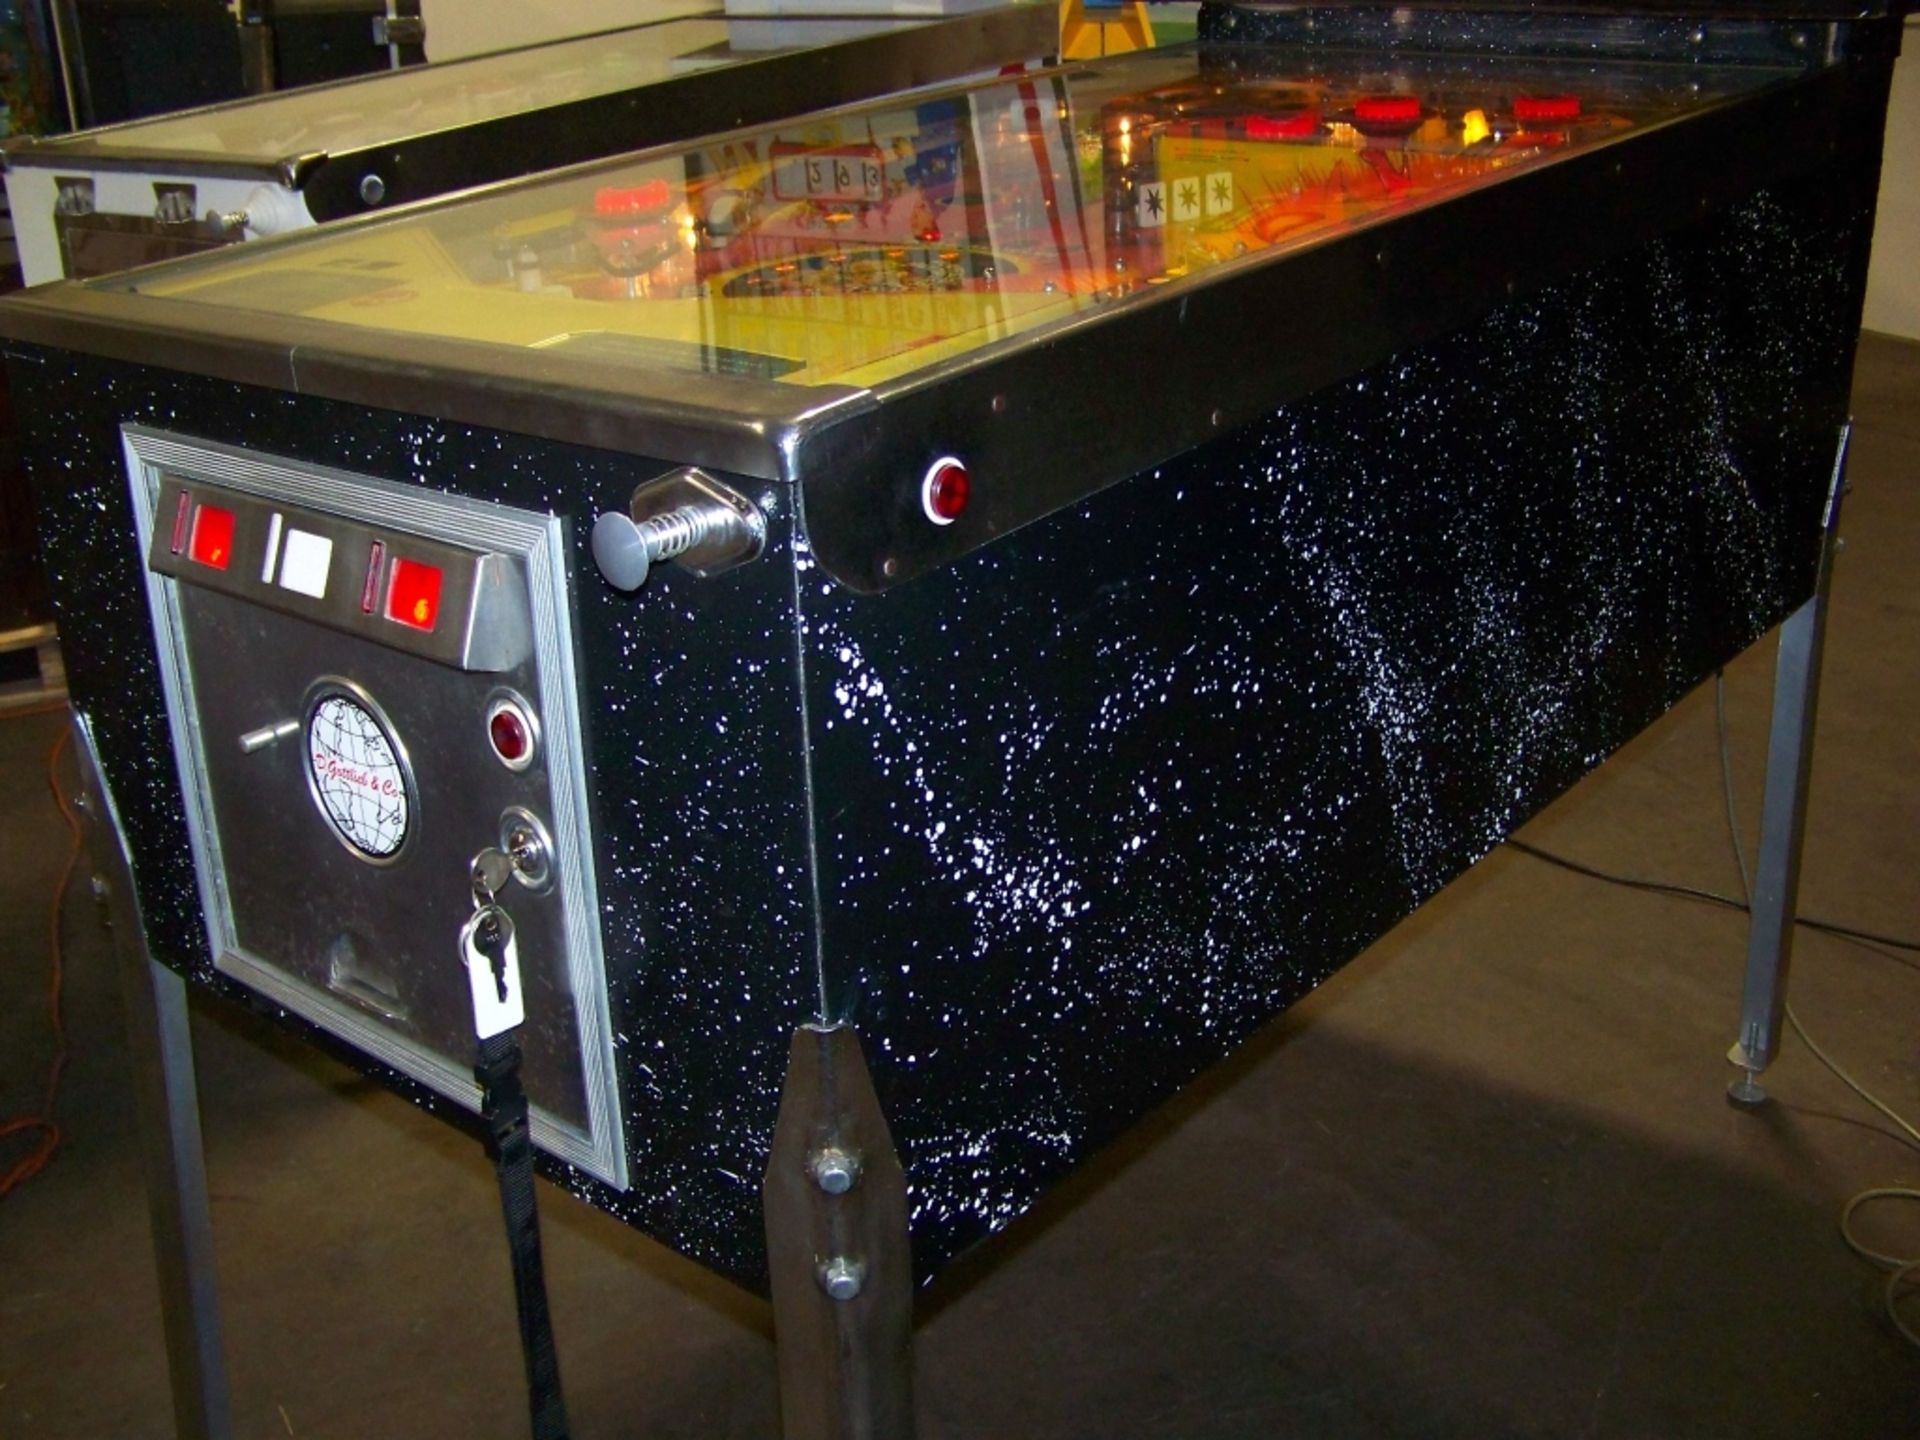 ECLIPSE PINBALL MACHINE RARE GOTTLIEB TITLE 1982 Item is in used condition. Evidence of wear and - Image 11 of 11